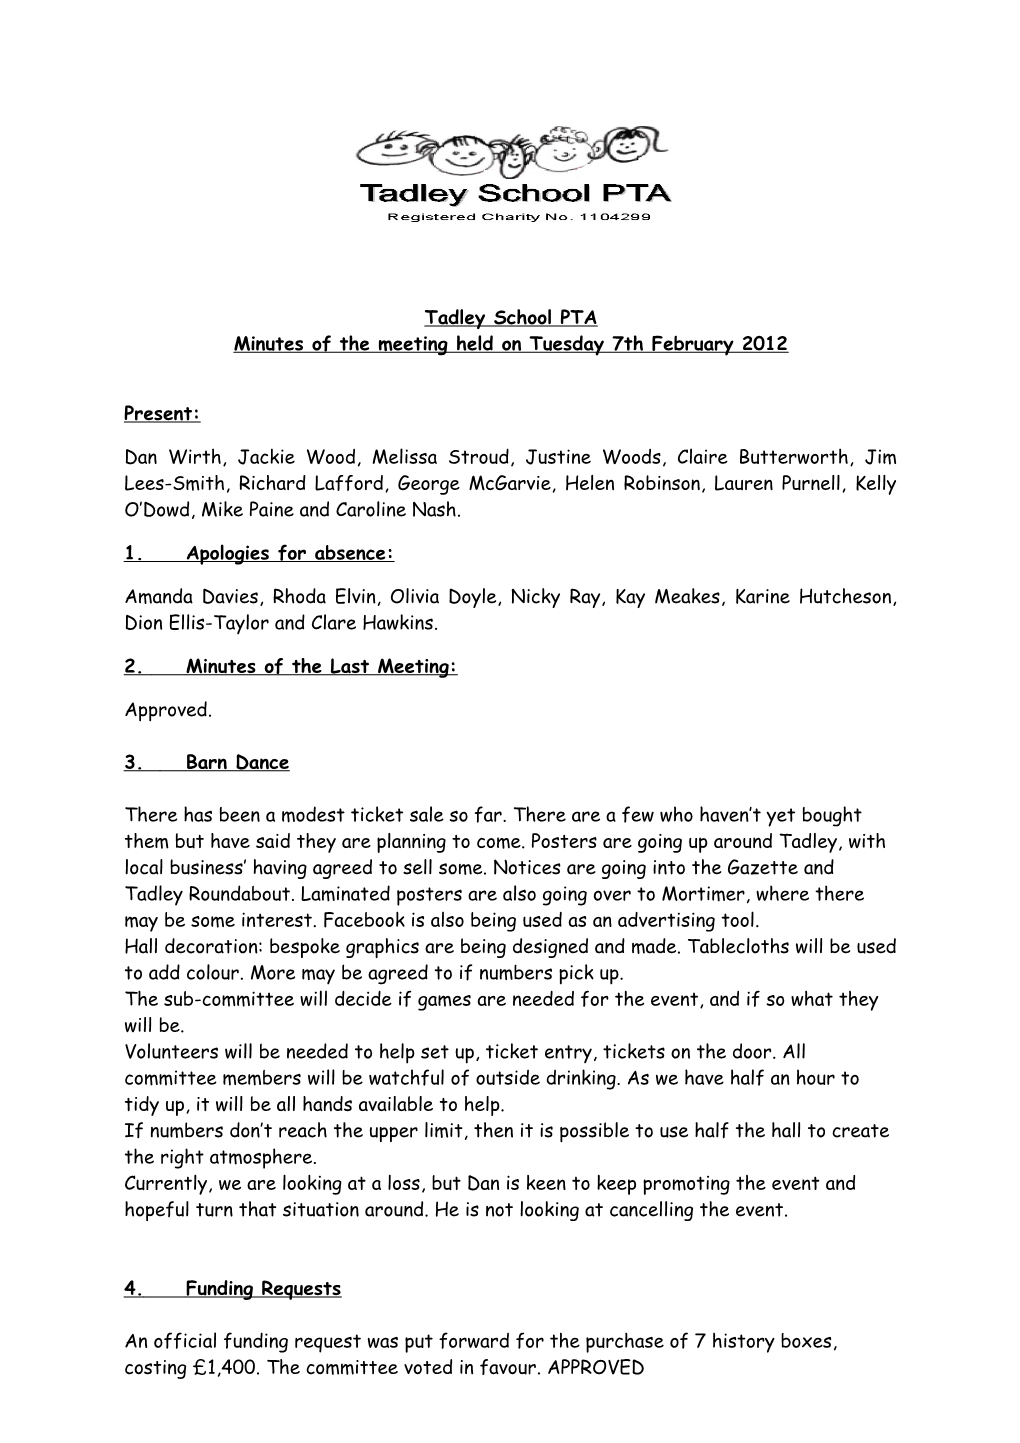 Minutes of the Meeting Held on Tuesday 7Thfebruary2012